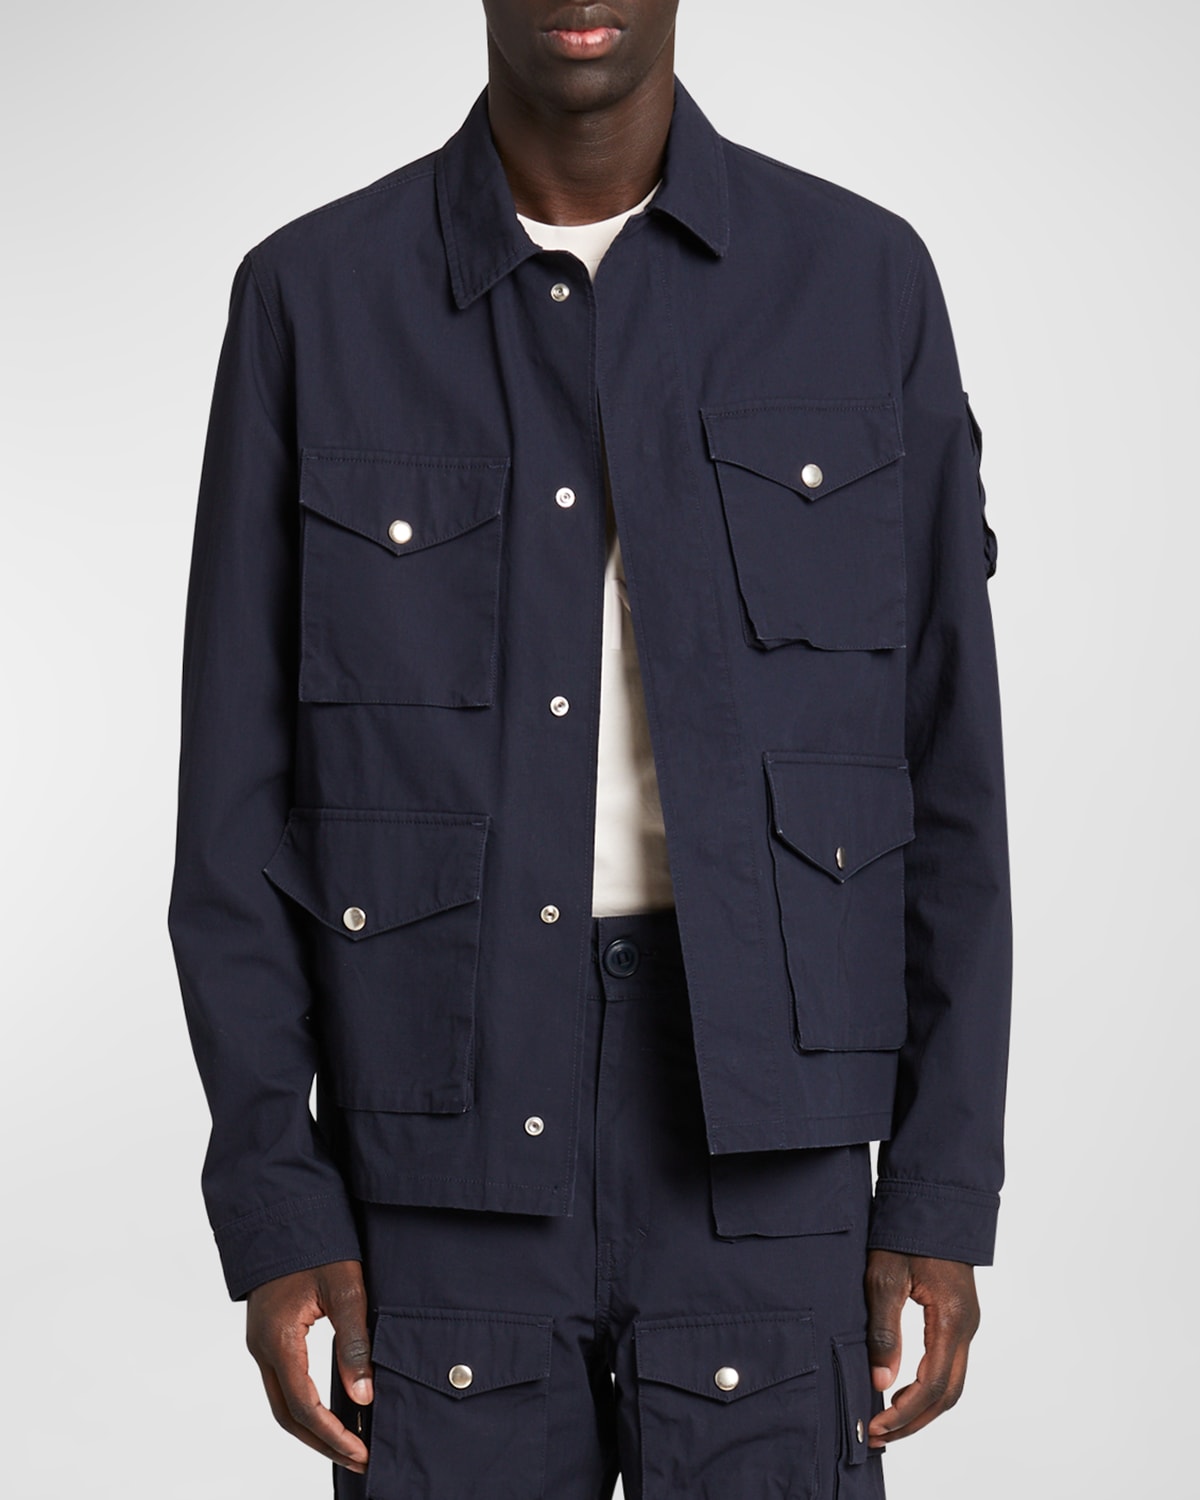 Givenchy Men's Cotton Ripstop Multi-pocket Shirt In Deep Blue